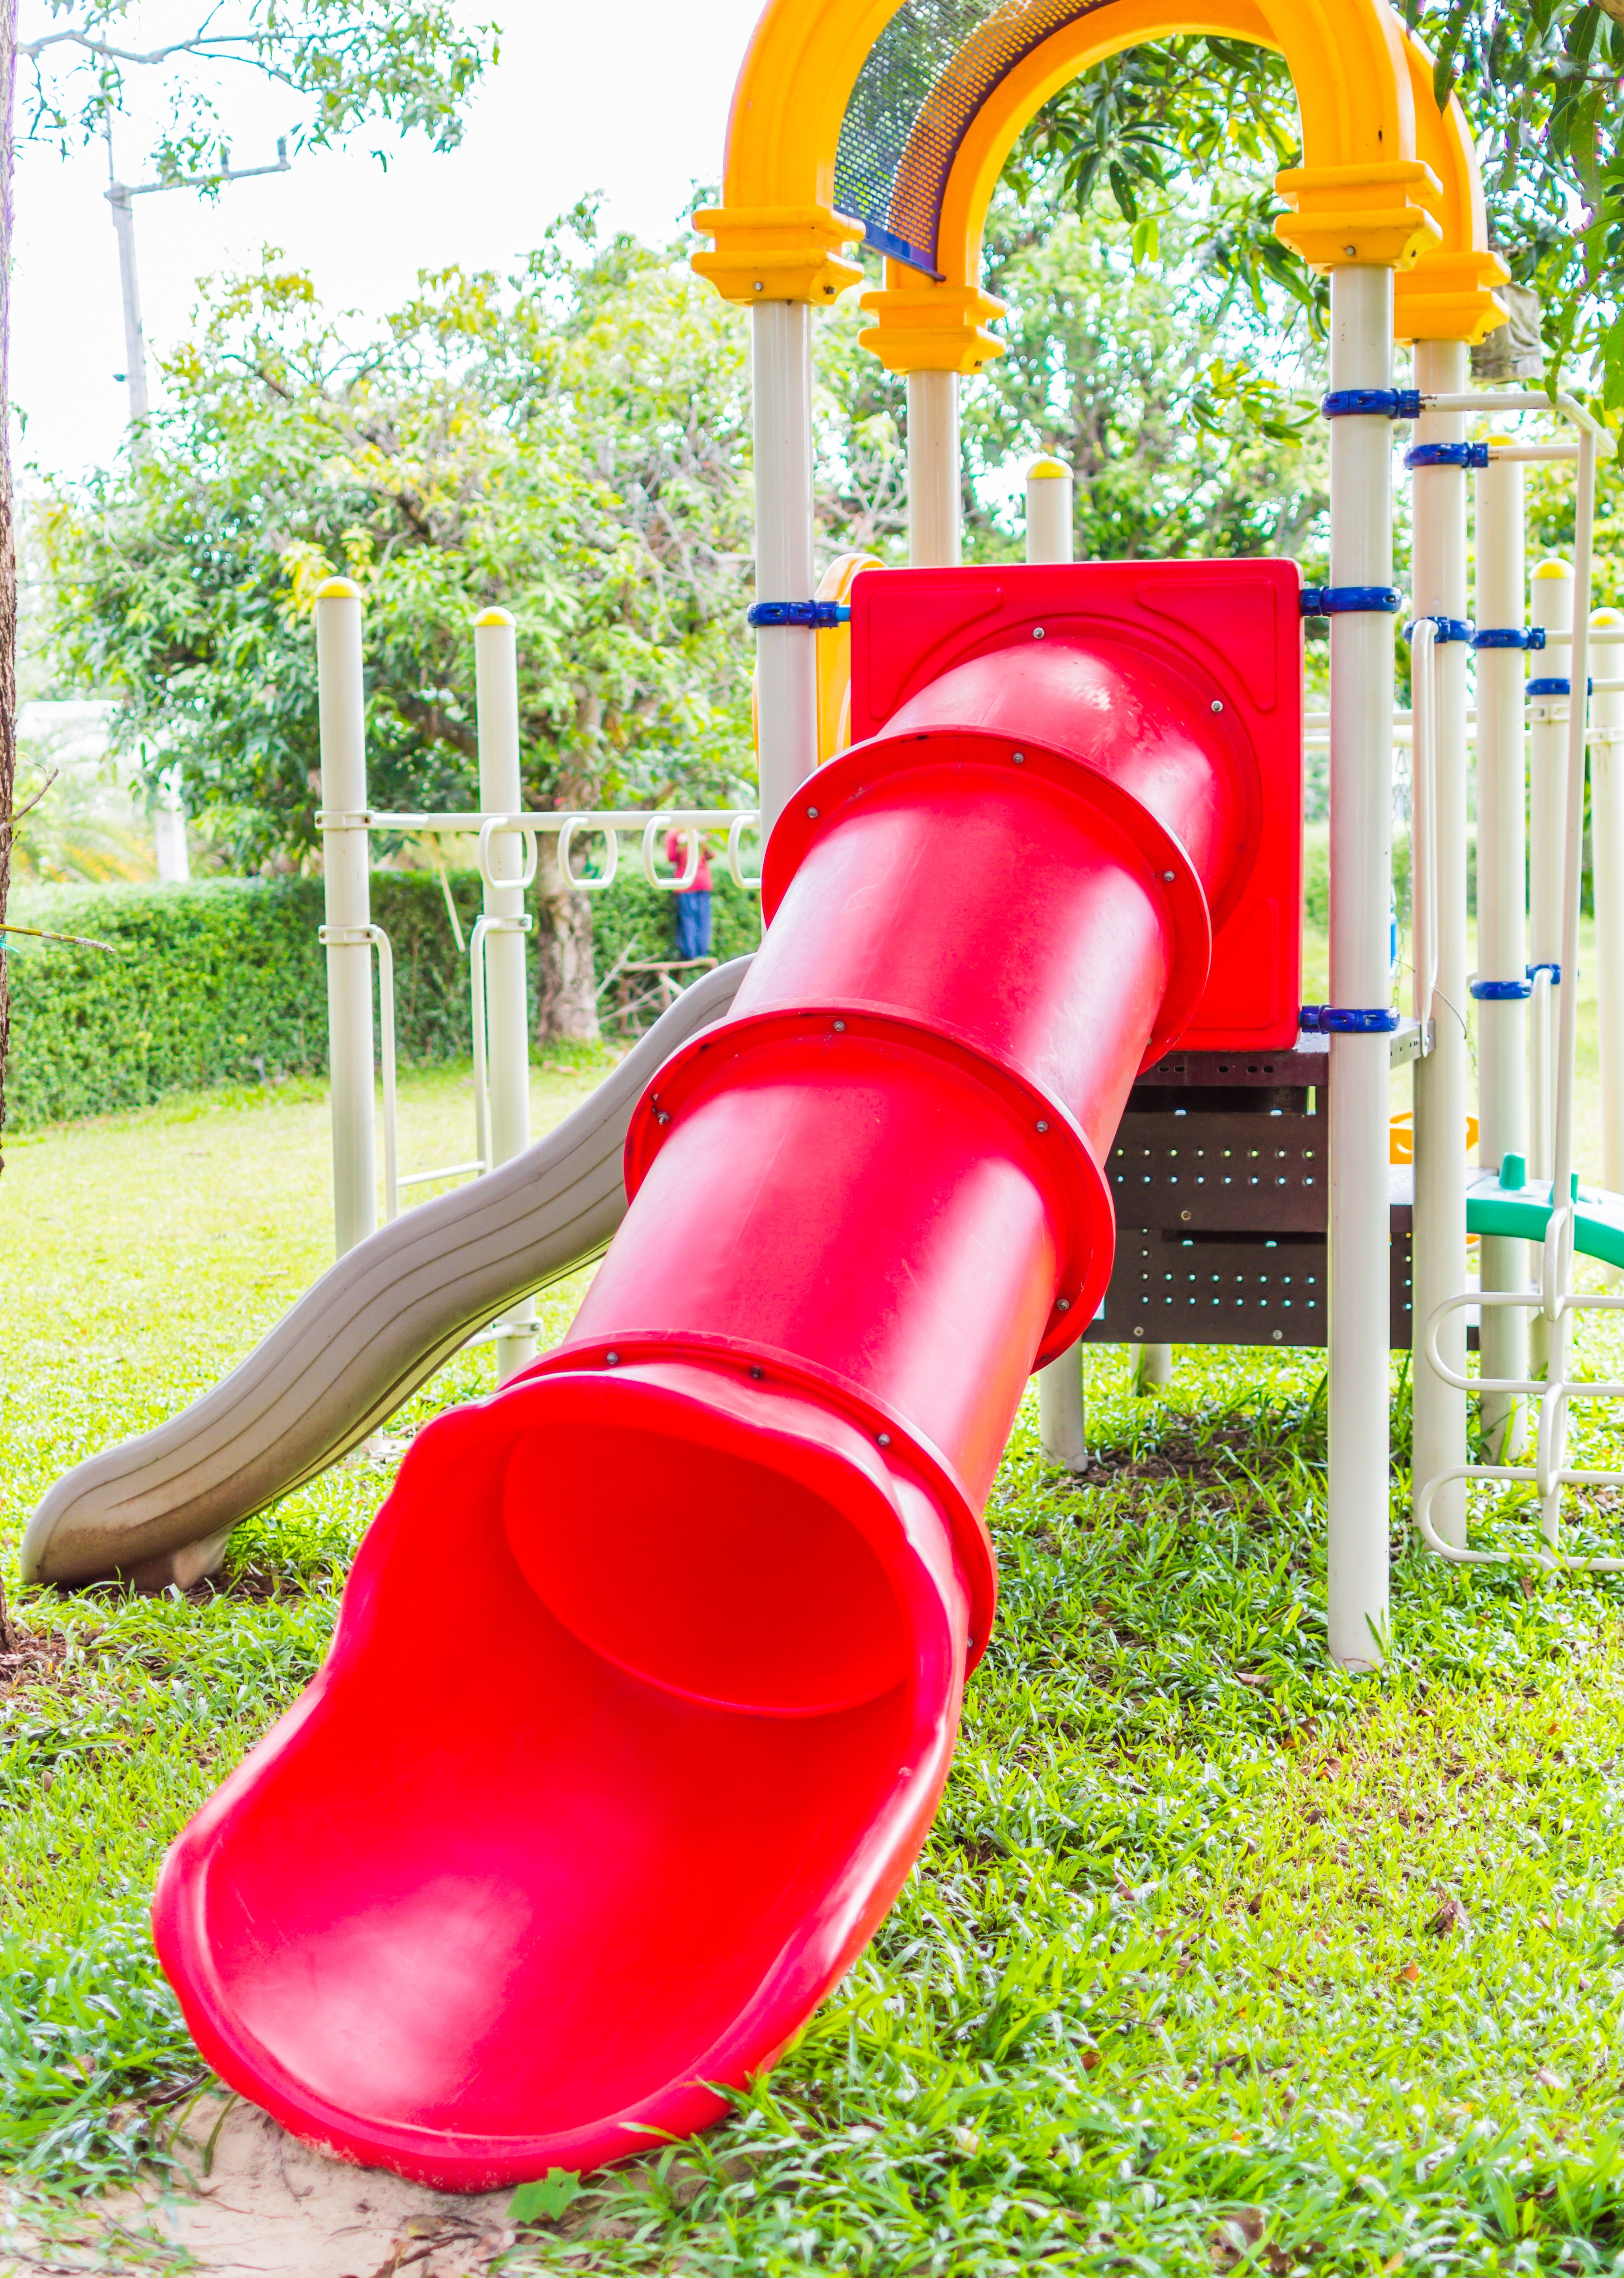 red white and yellow outdoor plastic slides